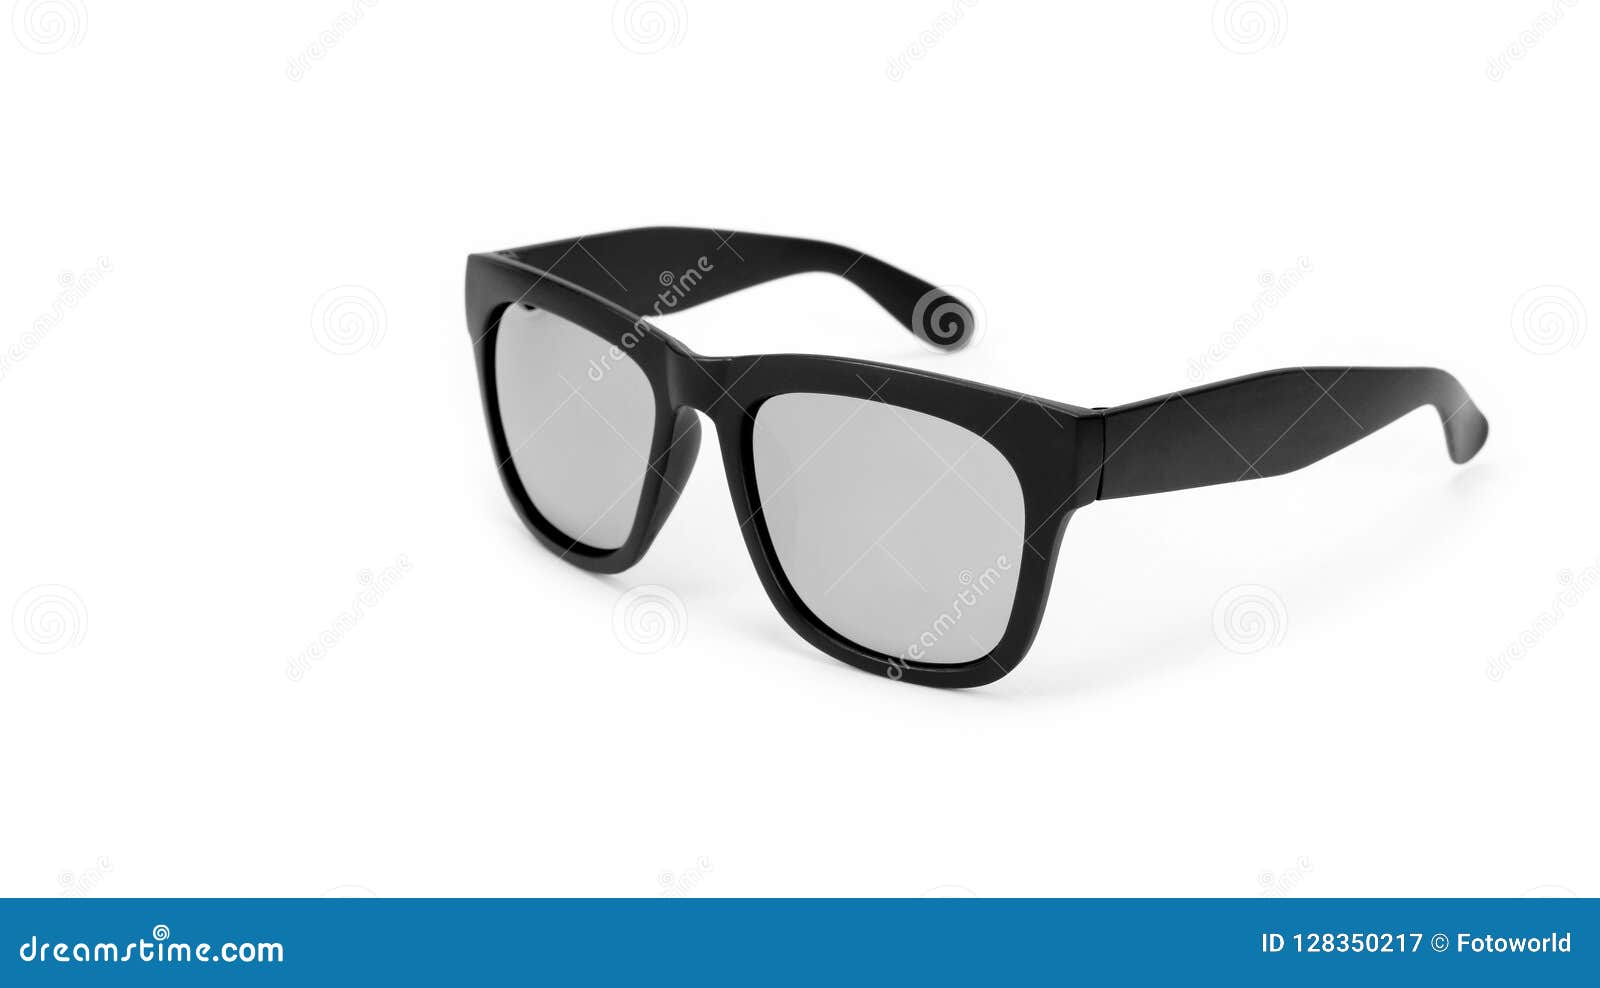 Clothes, Shoes and Accessories - Black Modern Sunglasses Stock Image ...